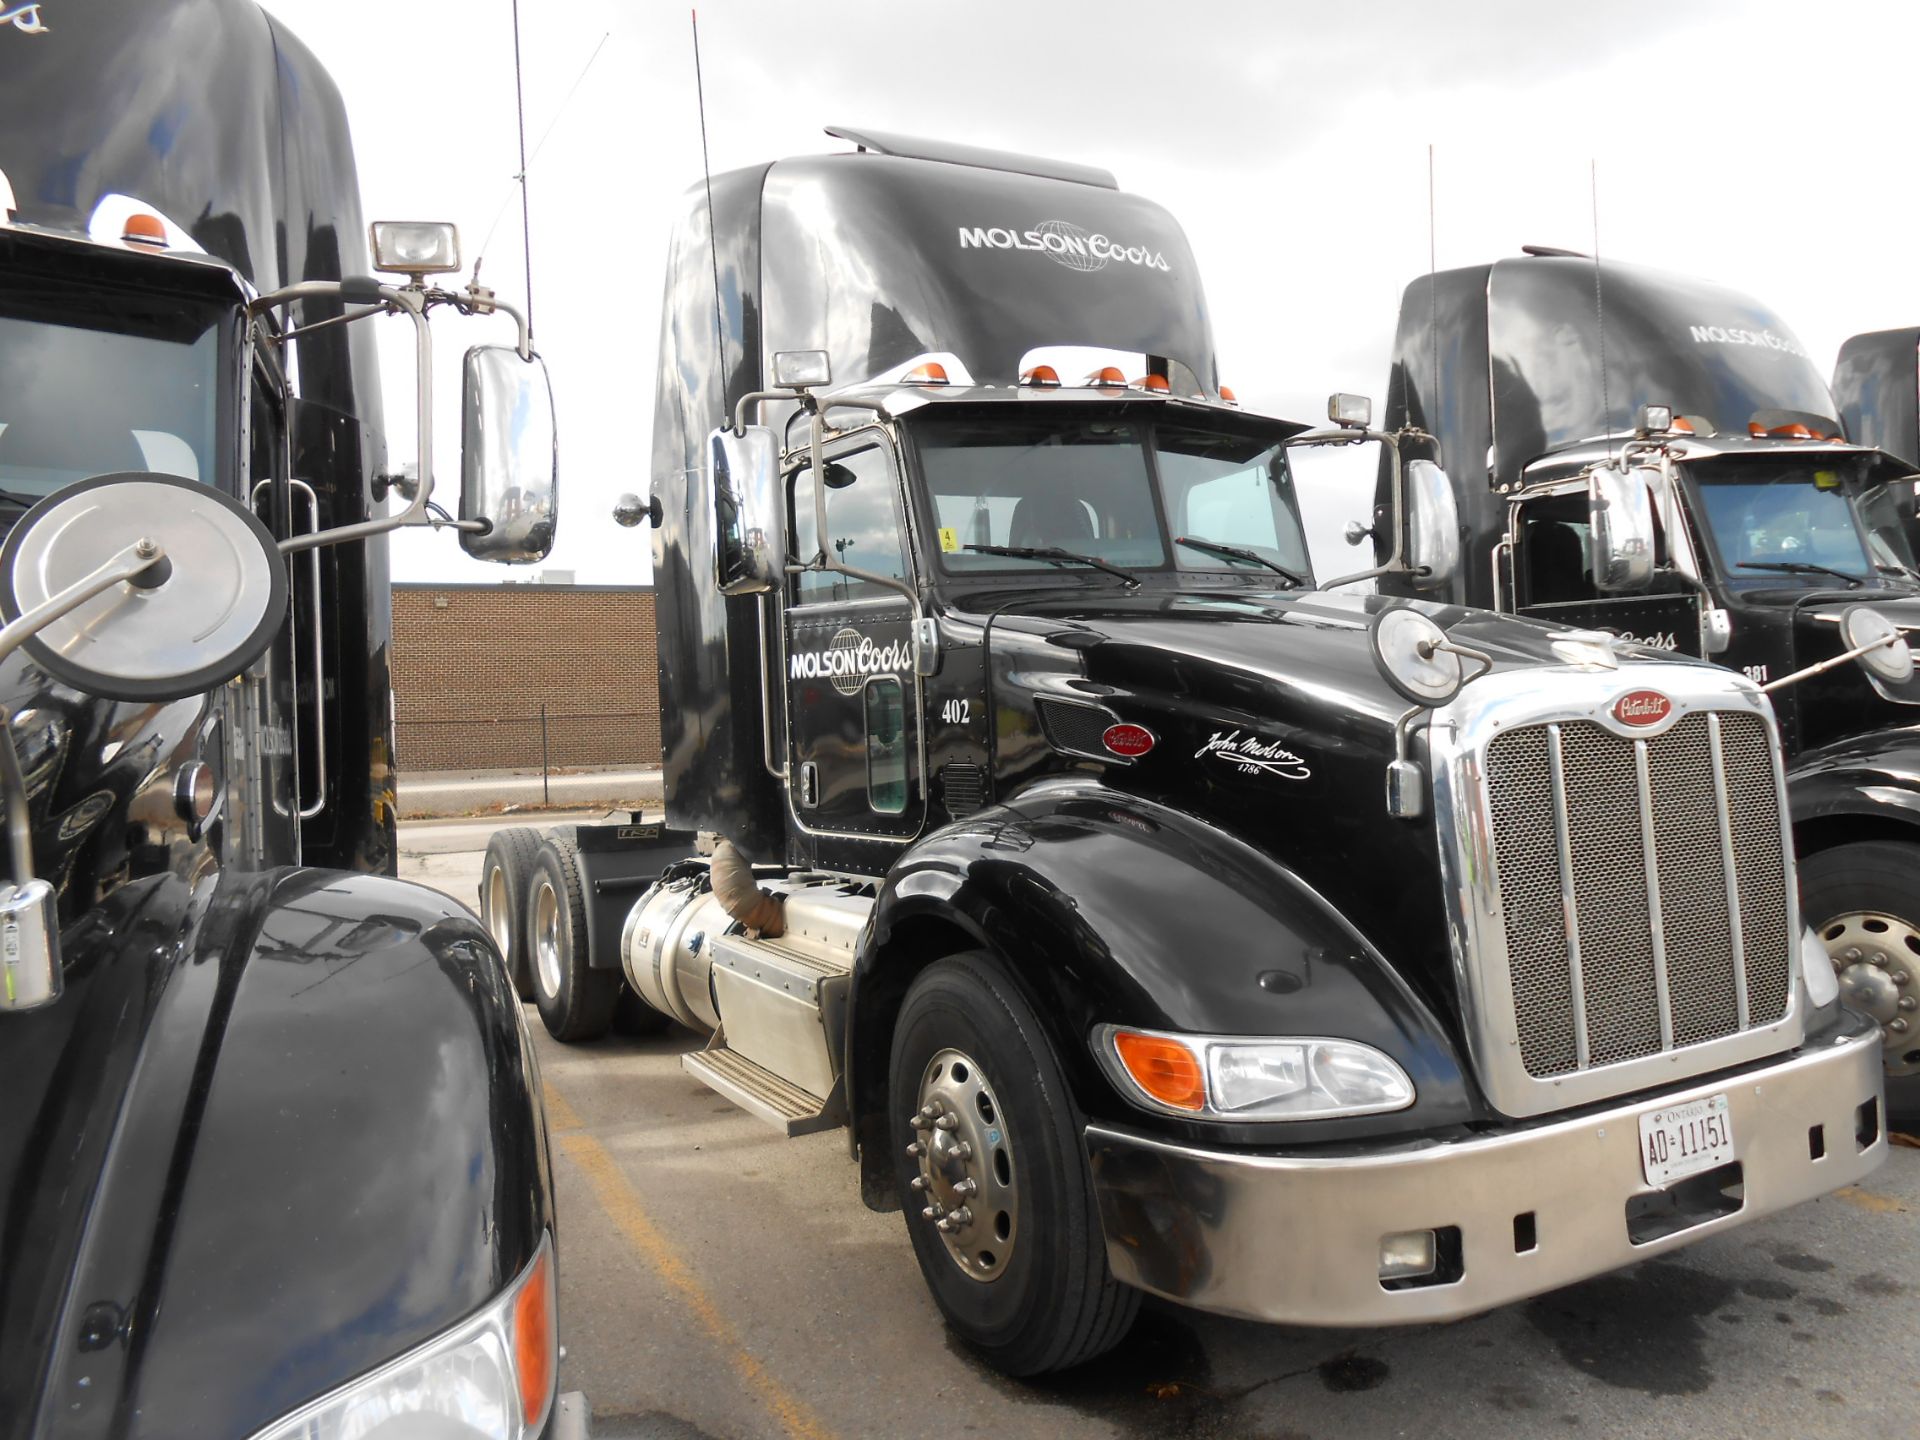 2011 Peterbilt 6X4 DAY CAB TRUCK, model 386 chassis 8070 kg weight with Cummins ISX15 485 diesel ( - Image 6 of 16